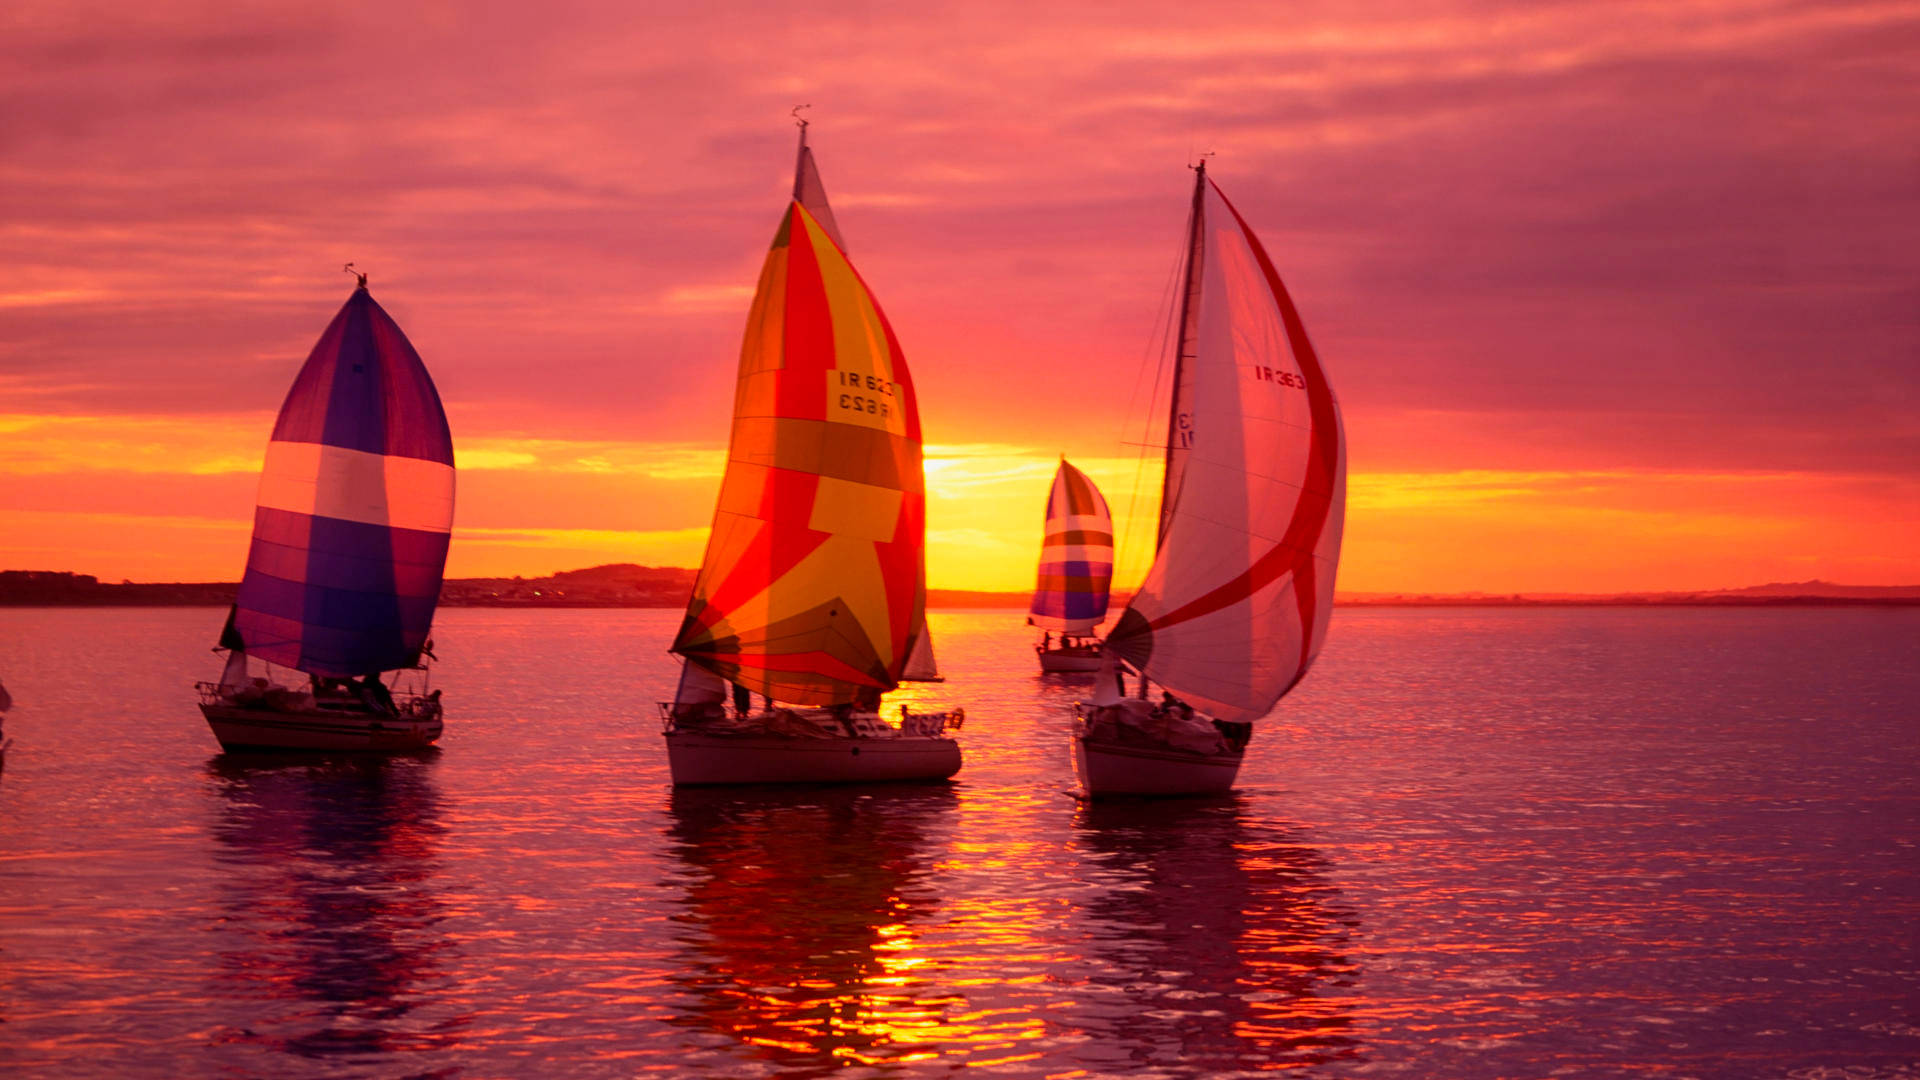 Sailing Sailboats With Colorful Sails Background